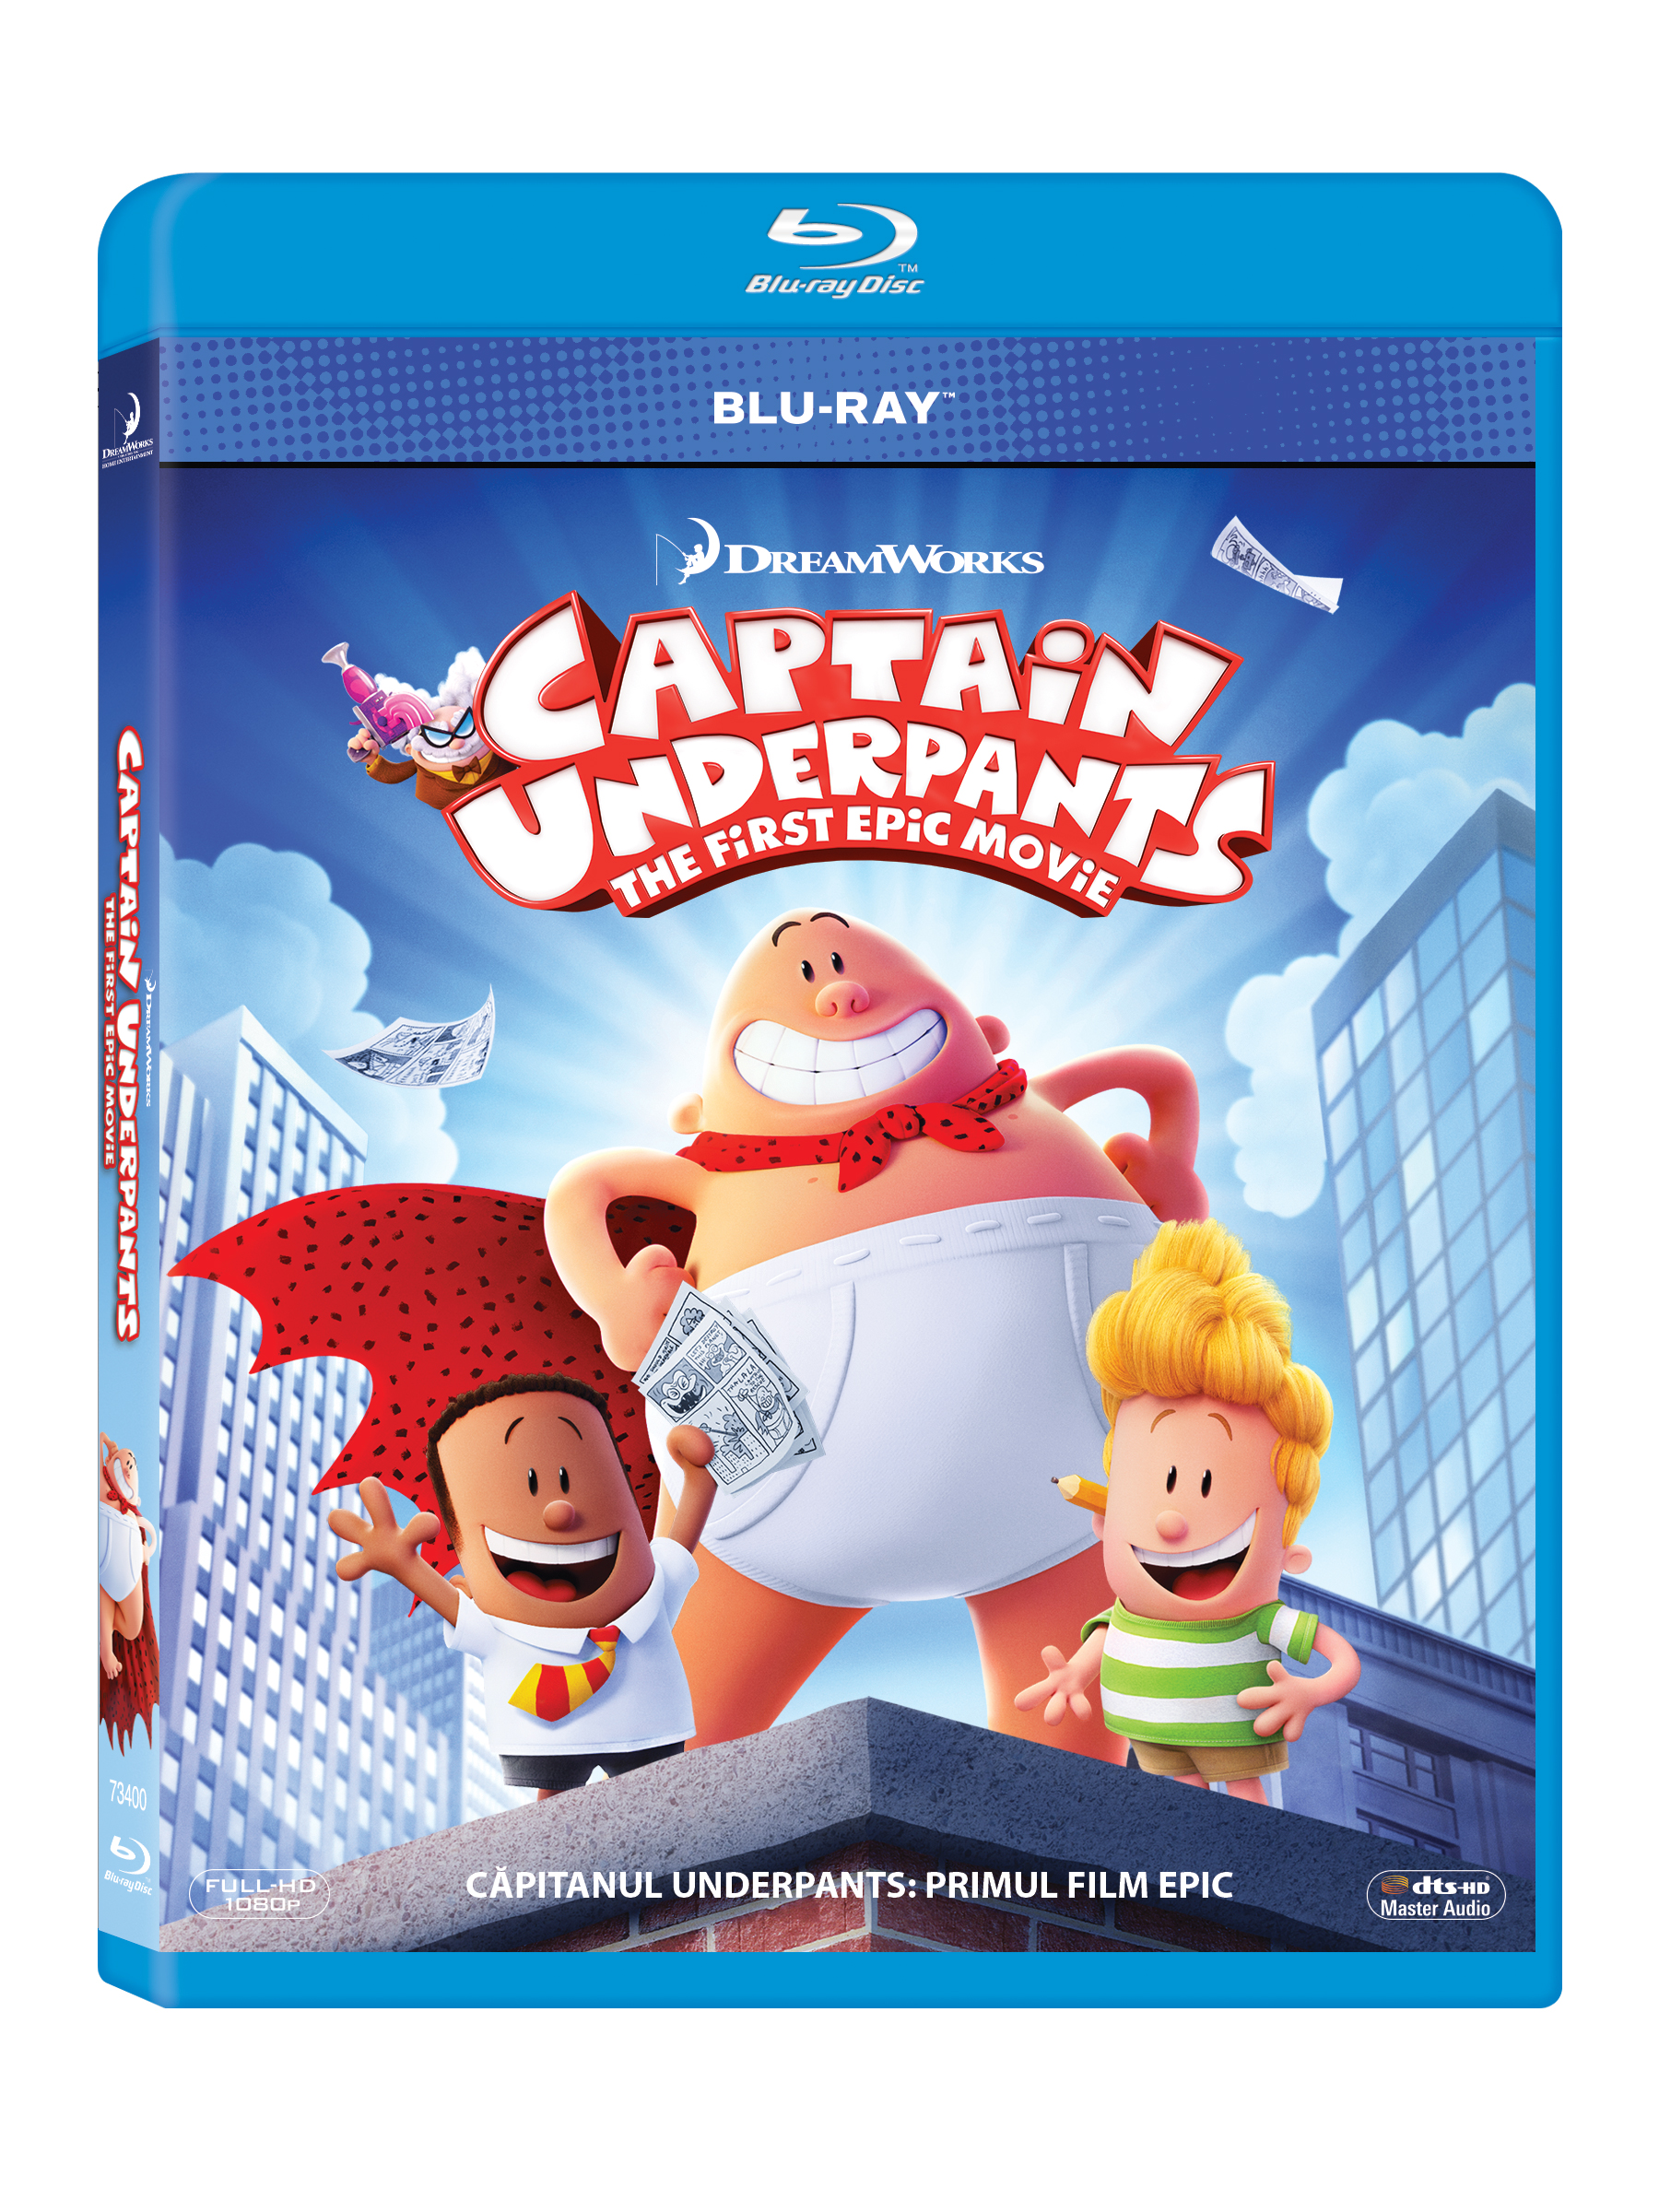 Capitanul Underpants - Primul film epic (Blu Ray Disc) / Captain Underpants - The first epic movie | David Soren